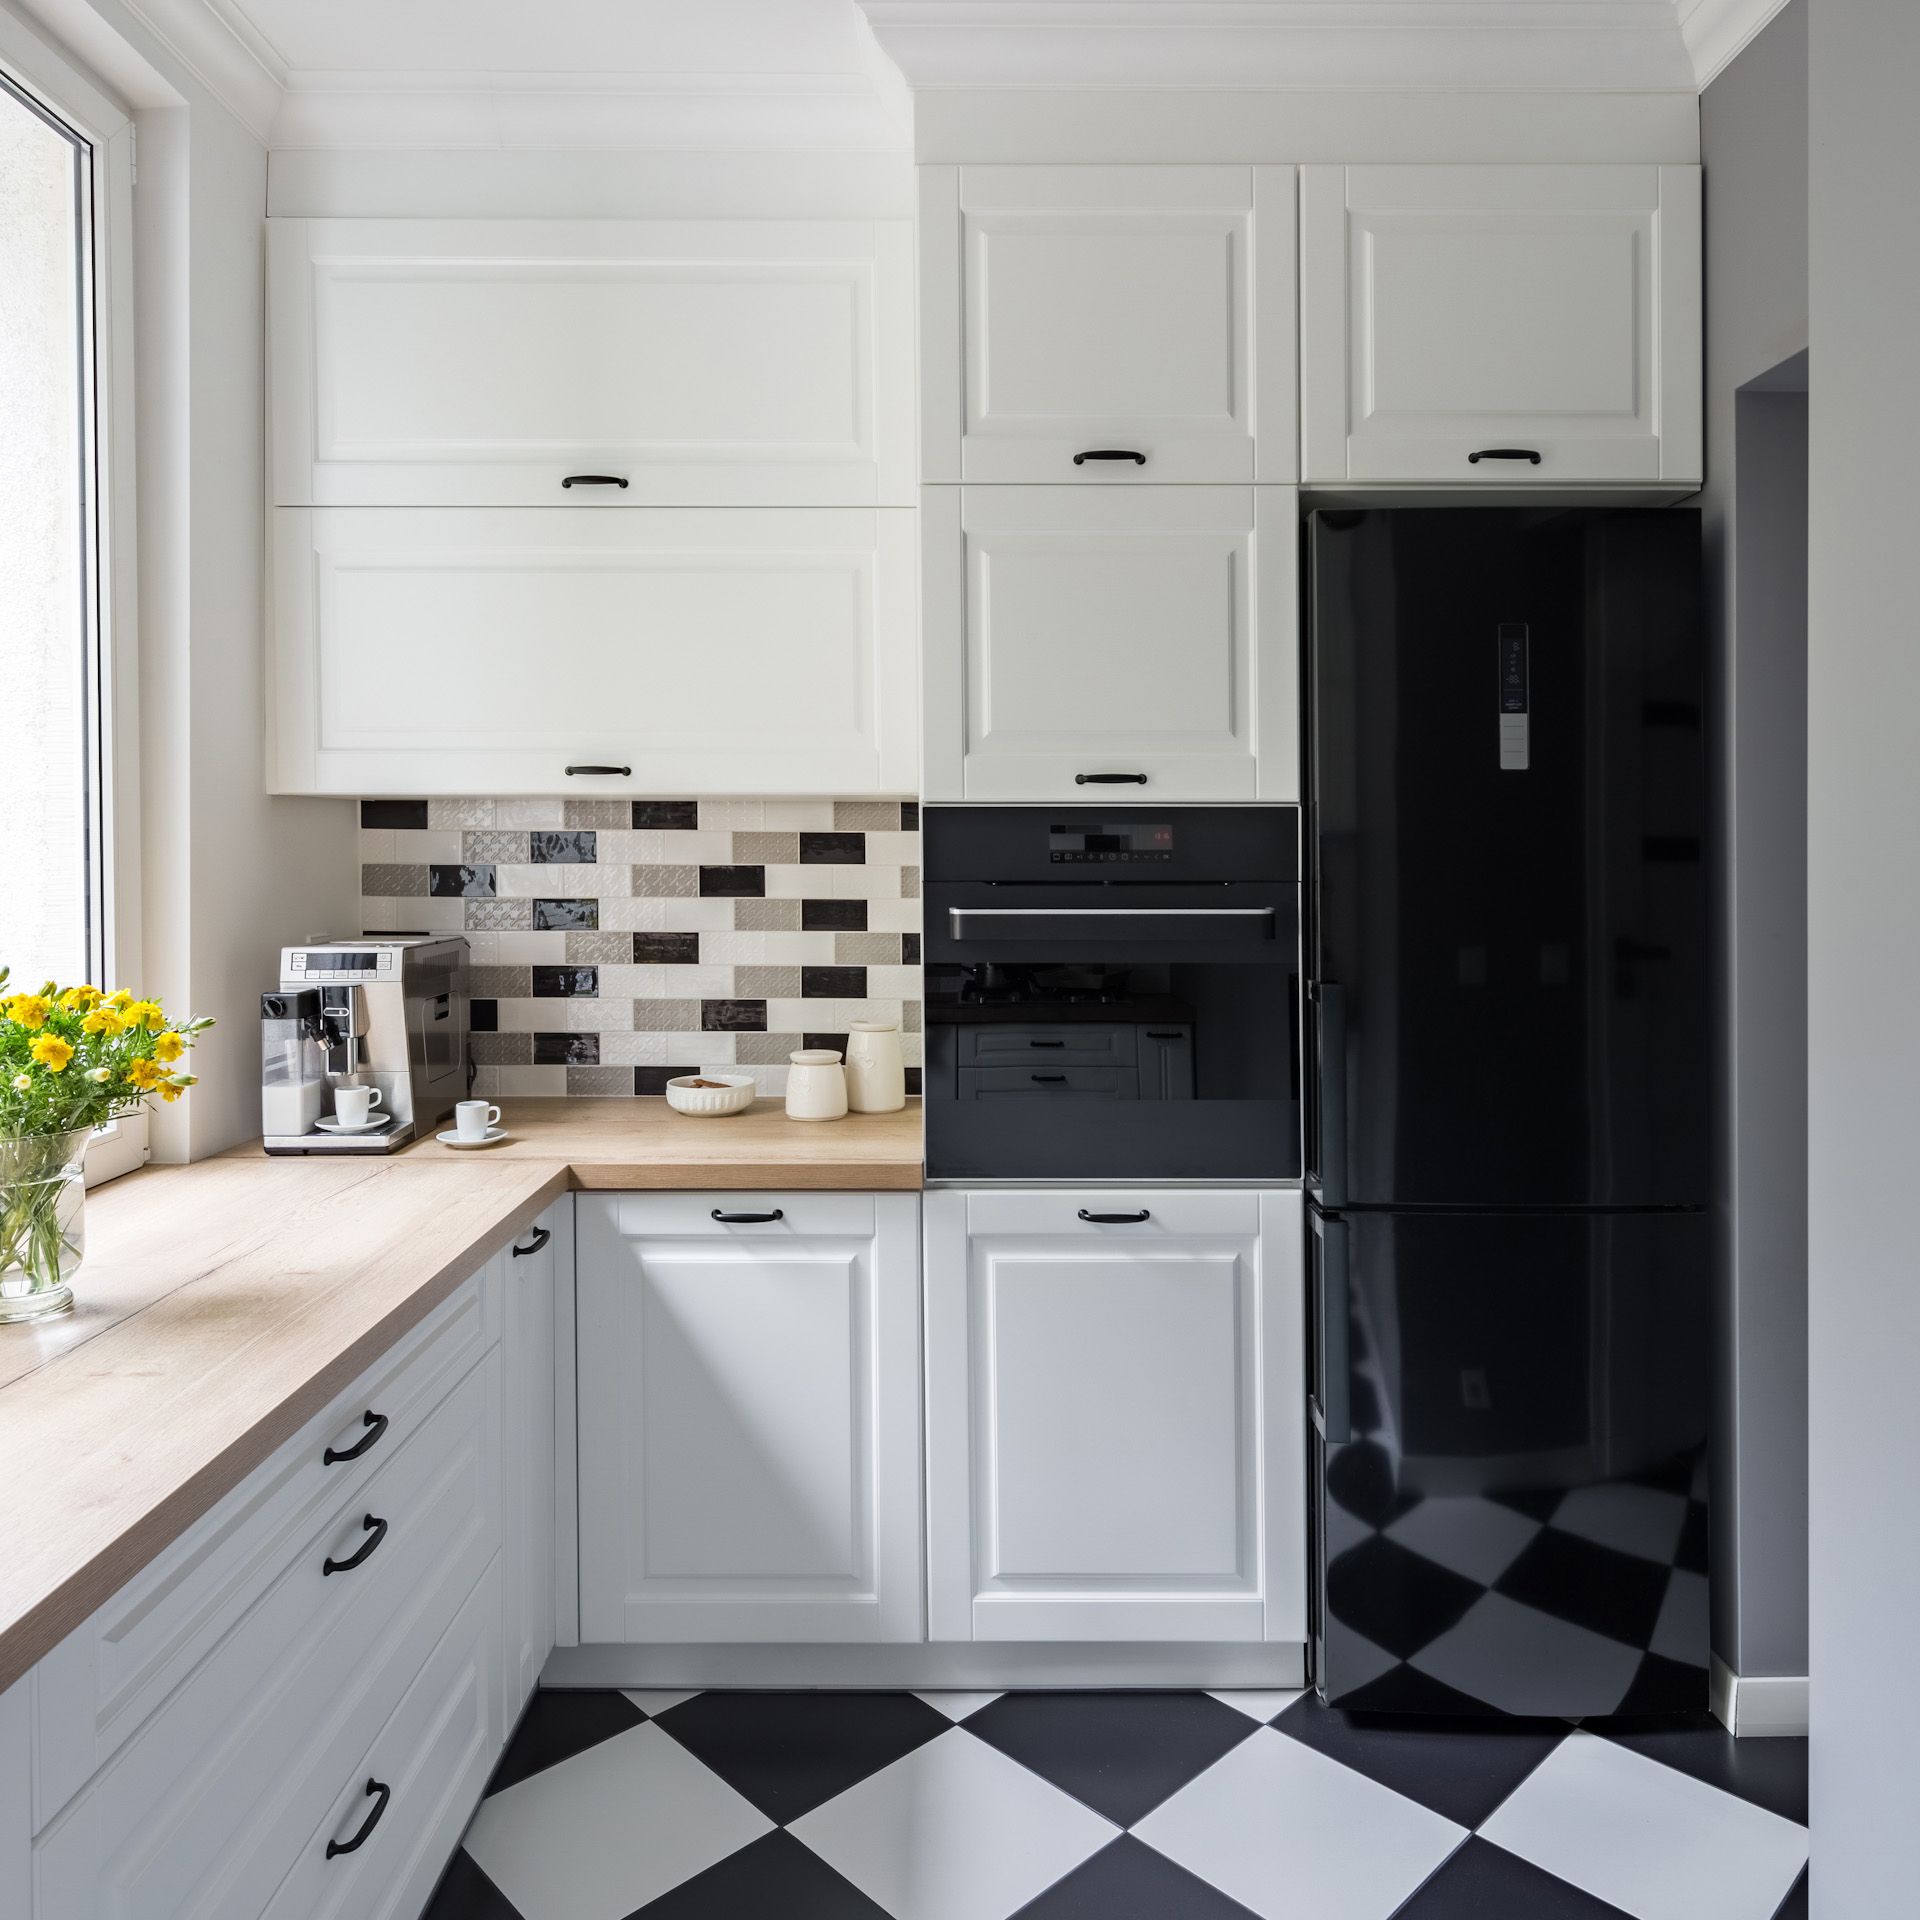 A kitchen with white cabinets black appliances and a checkered floor